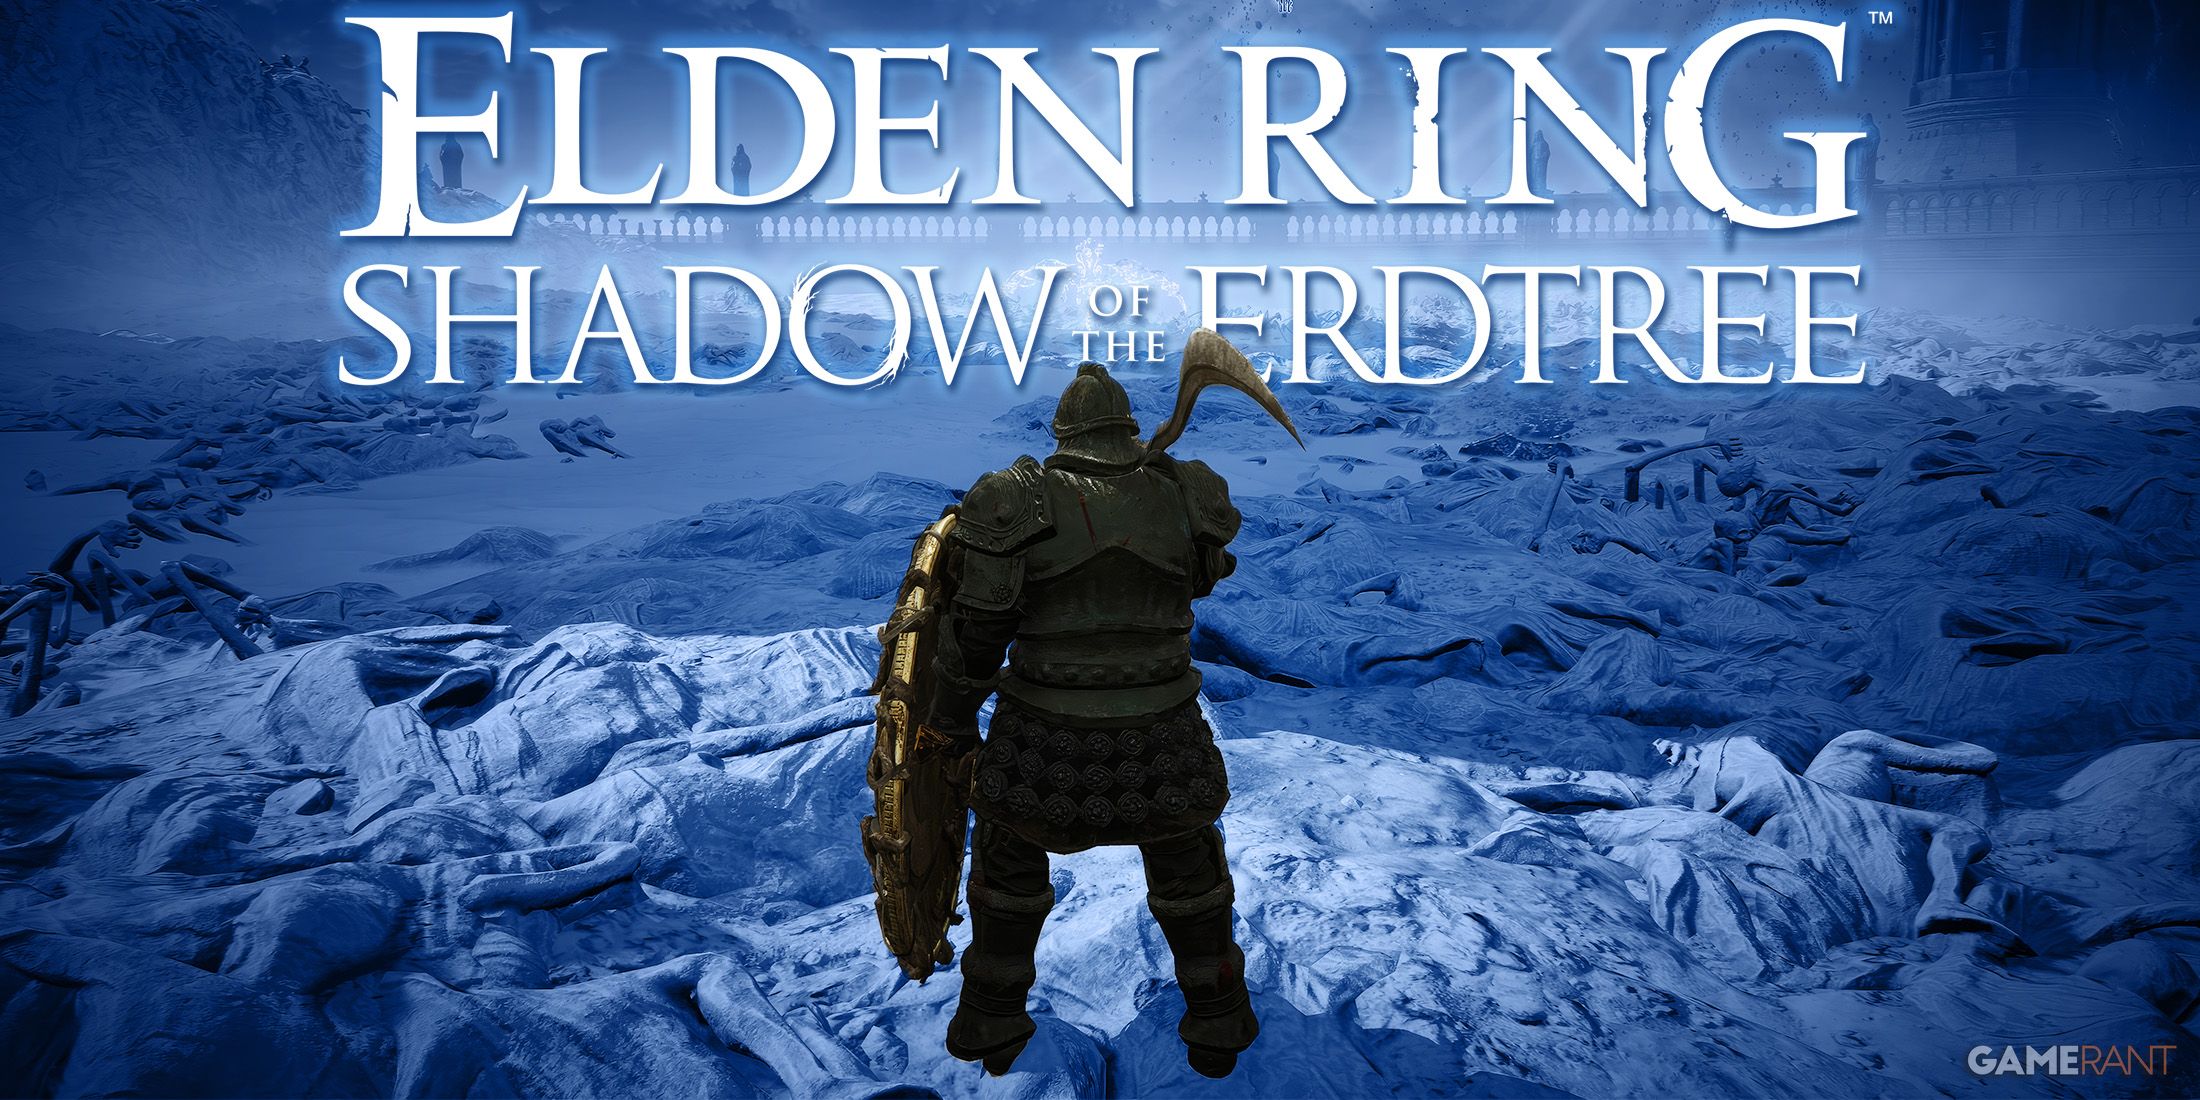 Elden Ring Shadow of the Erdtree white logo in final boss arena blue background swap